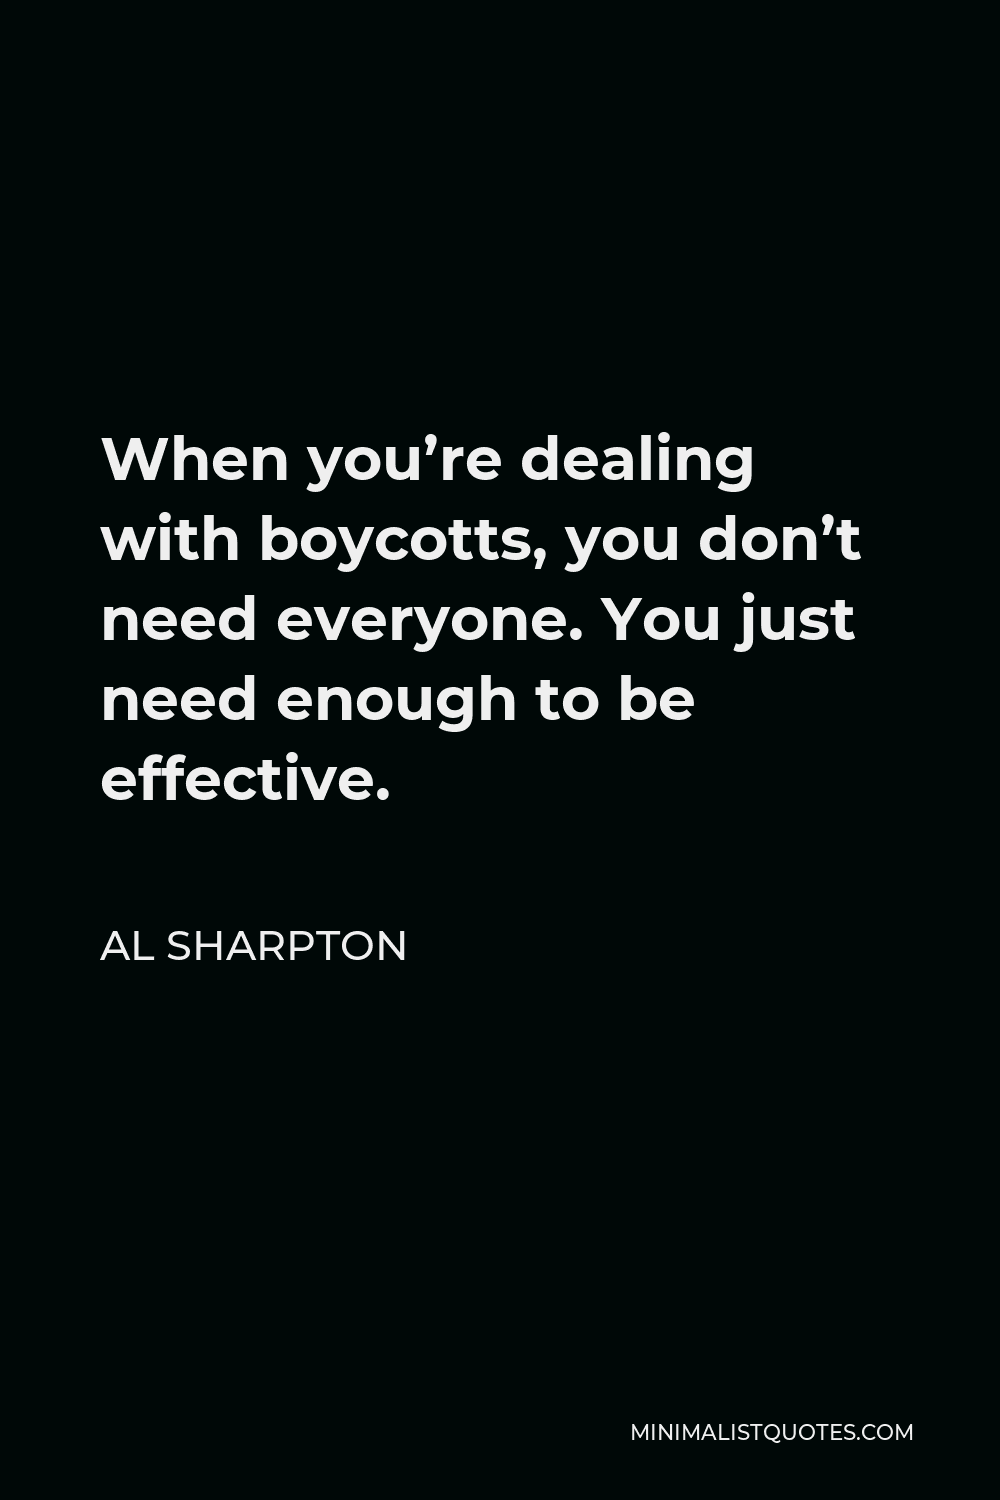 Al Sharpton Quote - When you’re dealing with boycotts, you don’t need everyone. You just need enough to be effective.